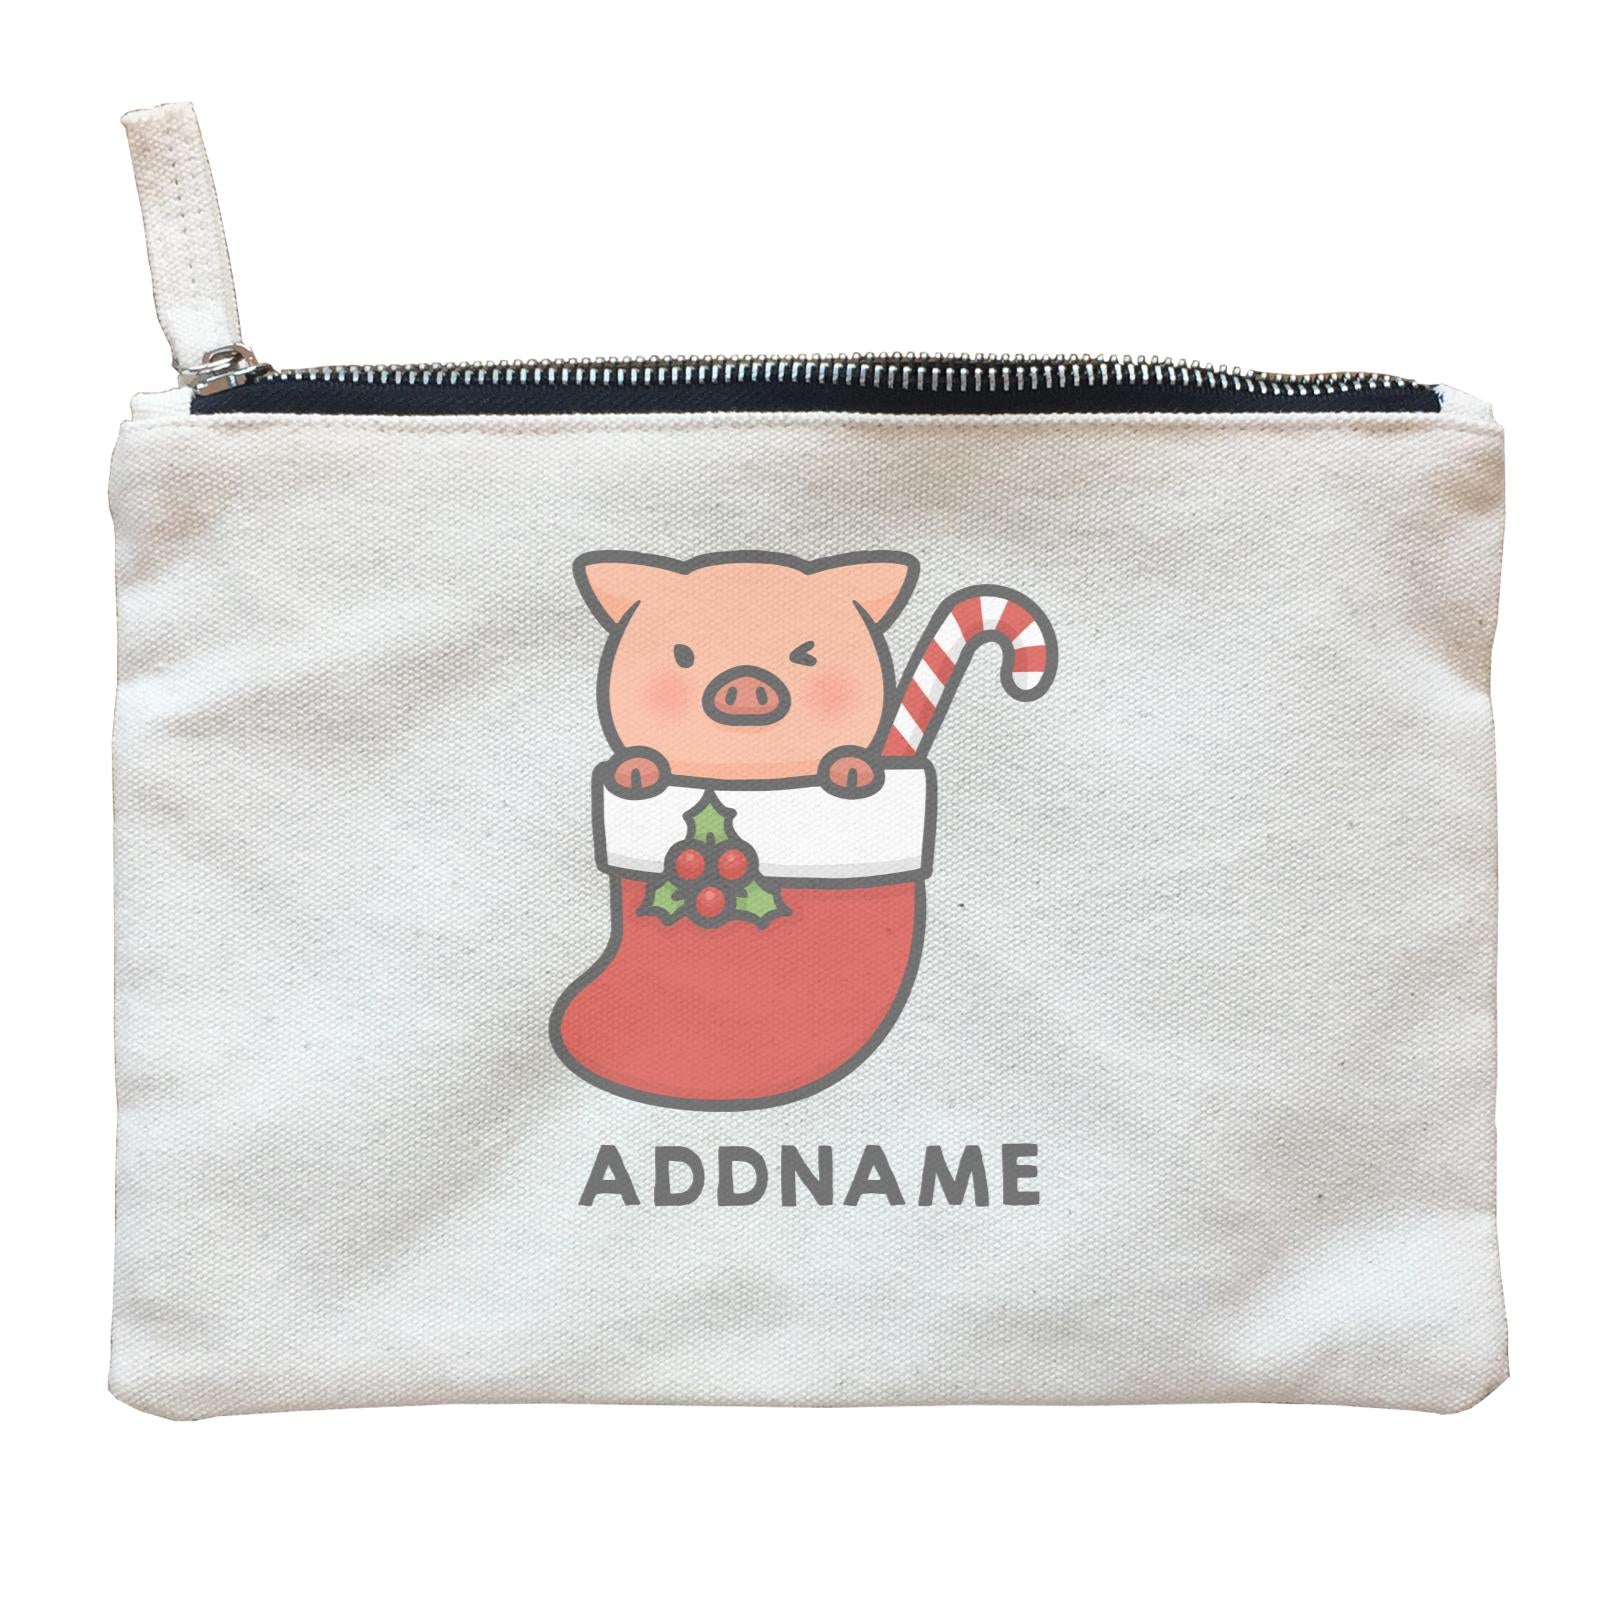 Xmas Cute Pig In Christmas Sock Addname Accessories Zipper Pouch